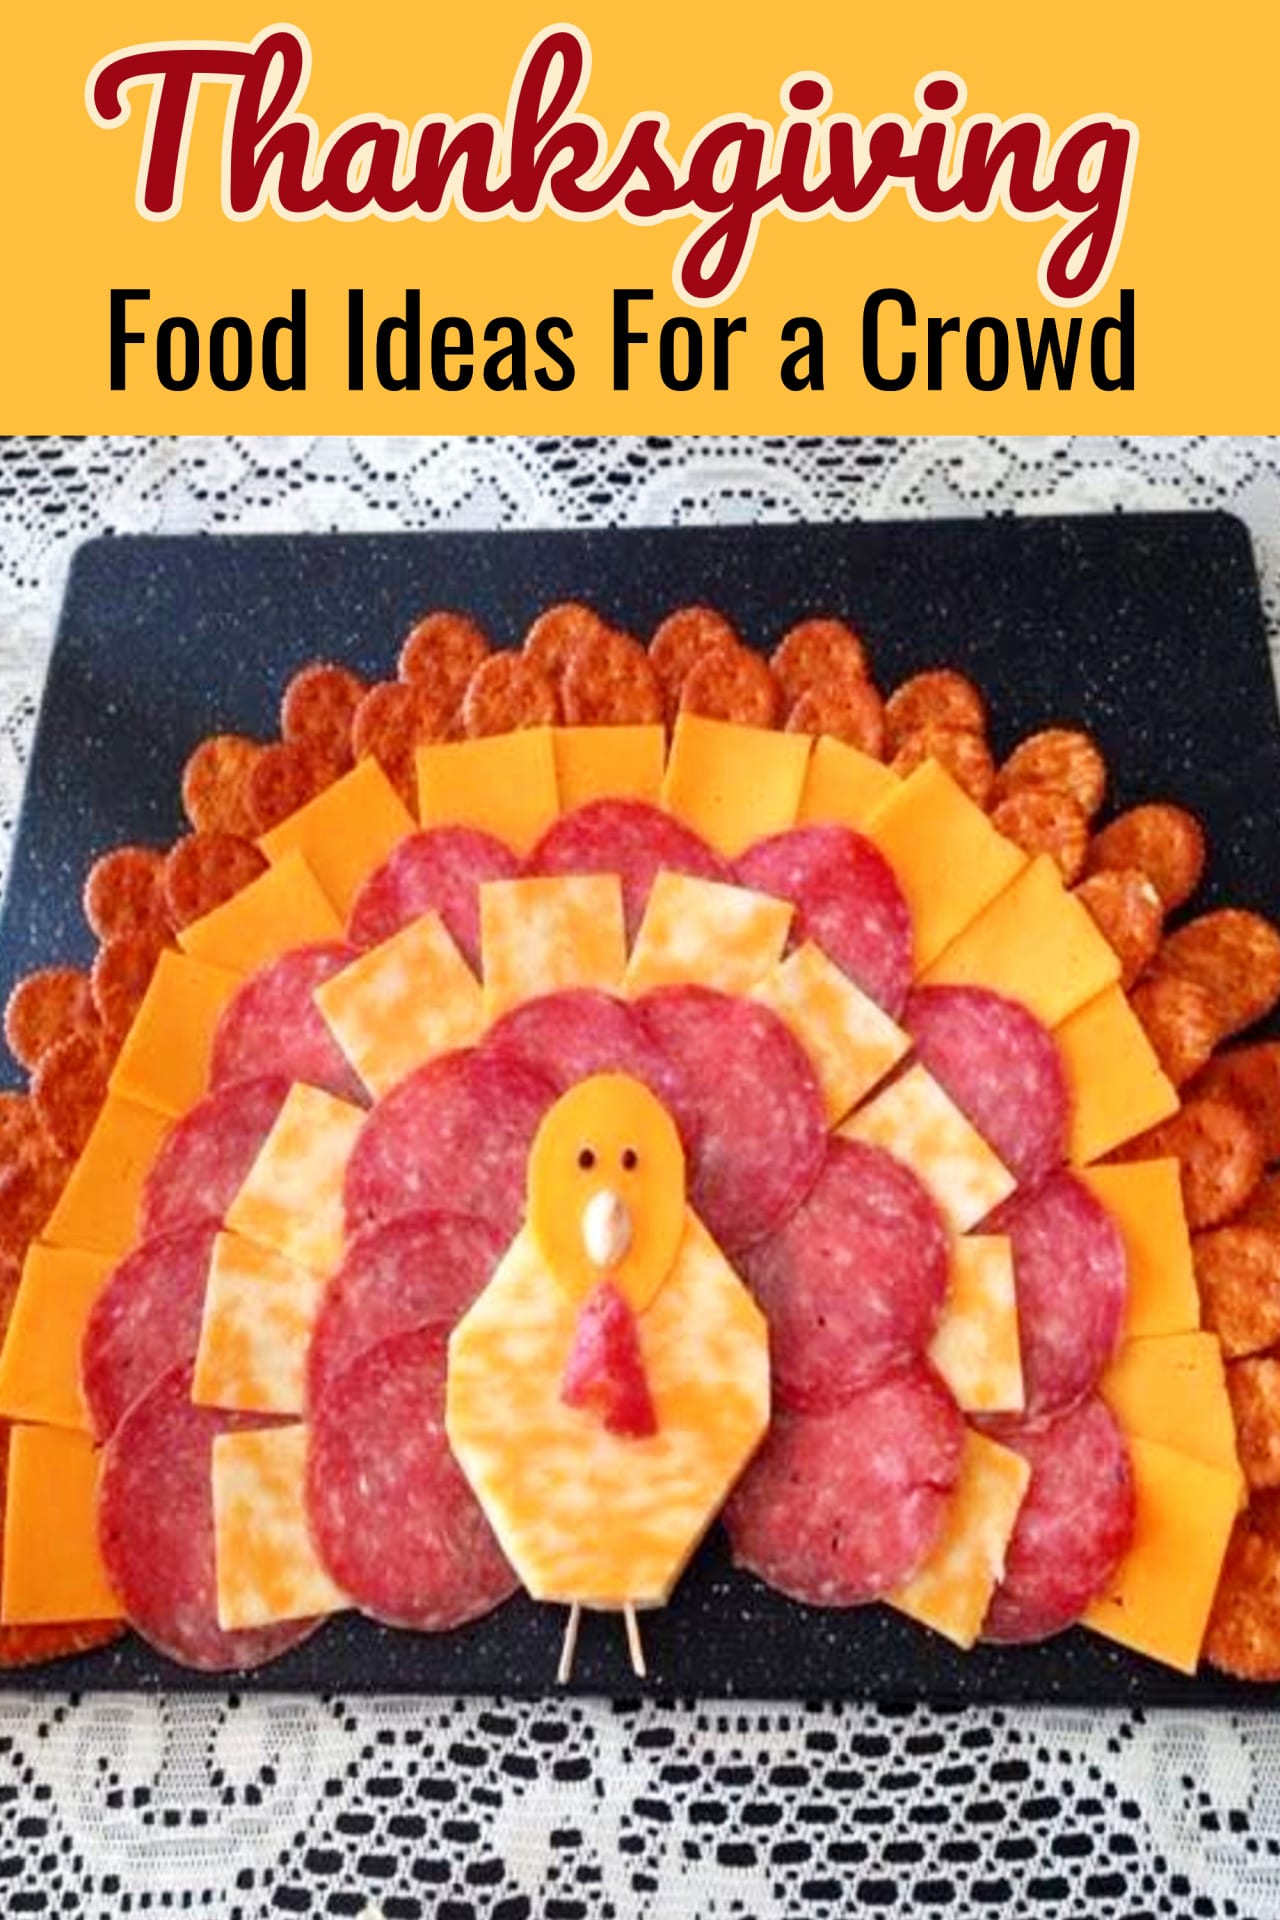 Thanksgiving food ideas for a crowd - fun and easy Thanksgiving snacks and side dishes for your Holiday party or family dinner